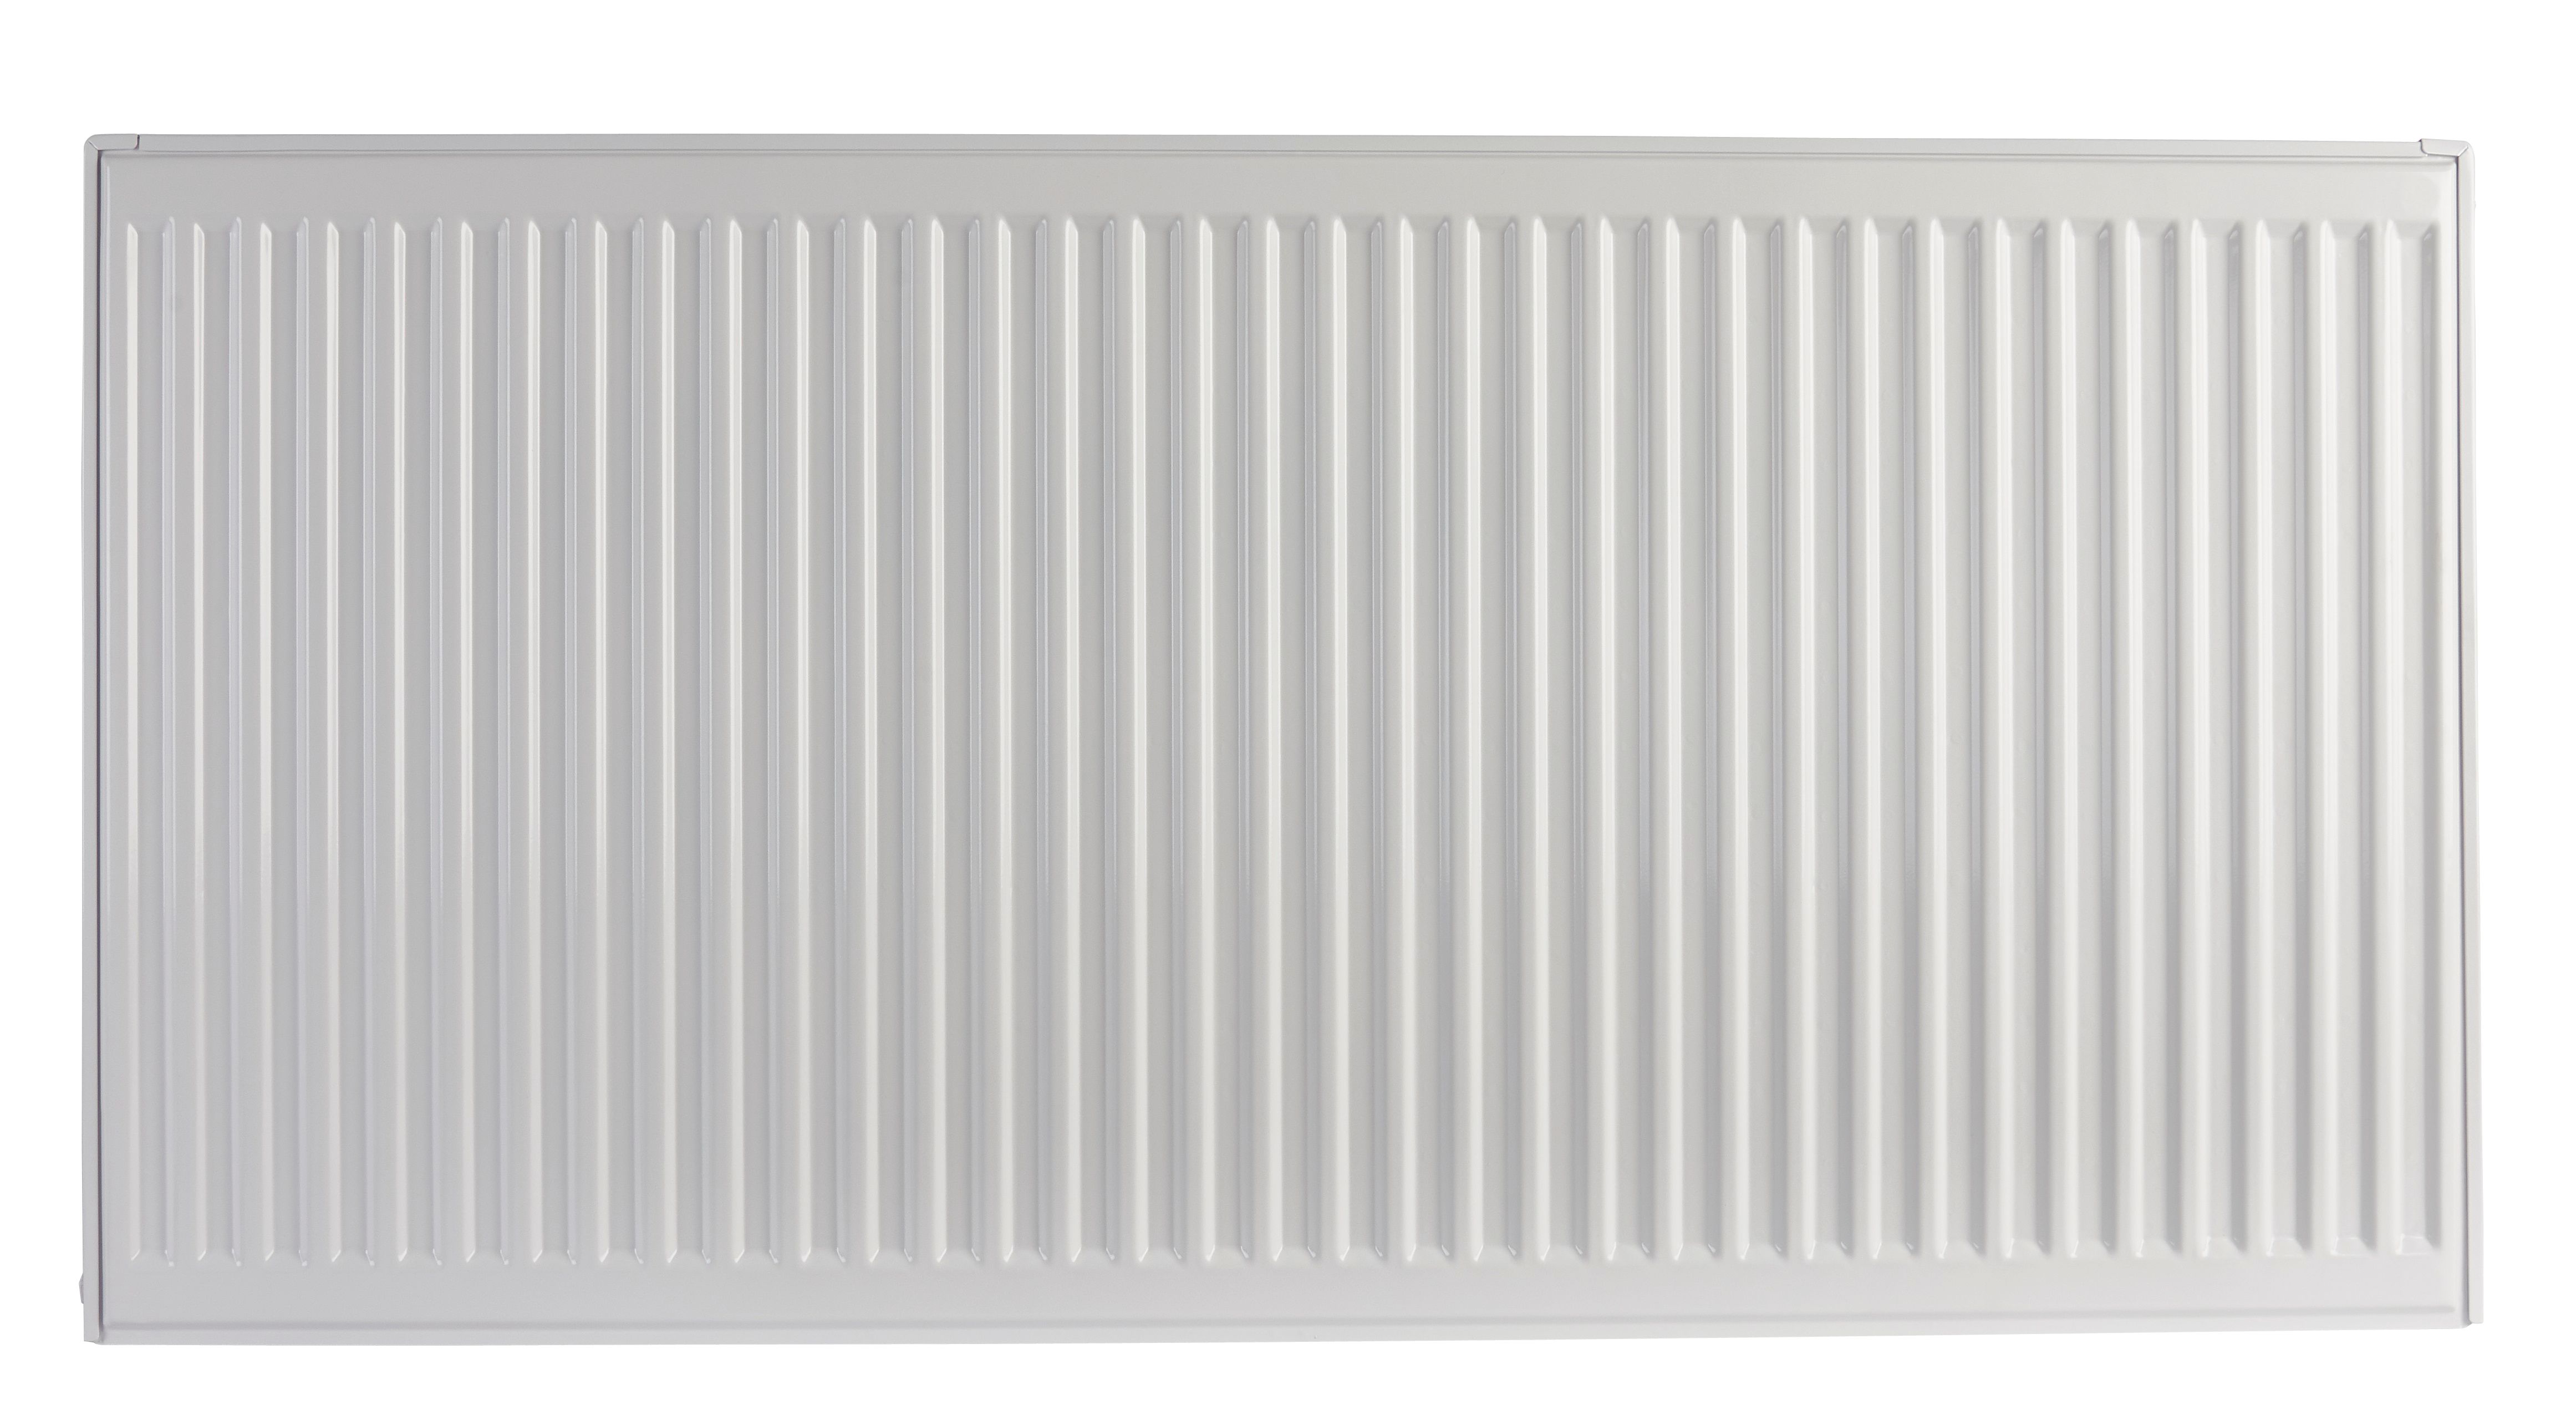 Image of Homeline by Stelrad 600 x 700mm Type 21 Double Panel Plus Single Convector Radiator